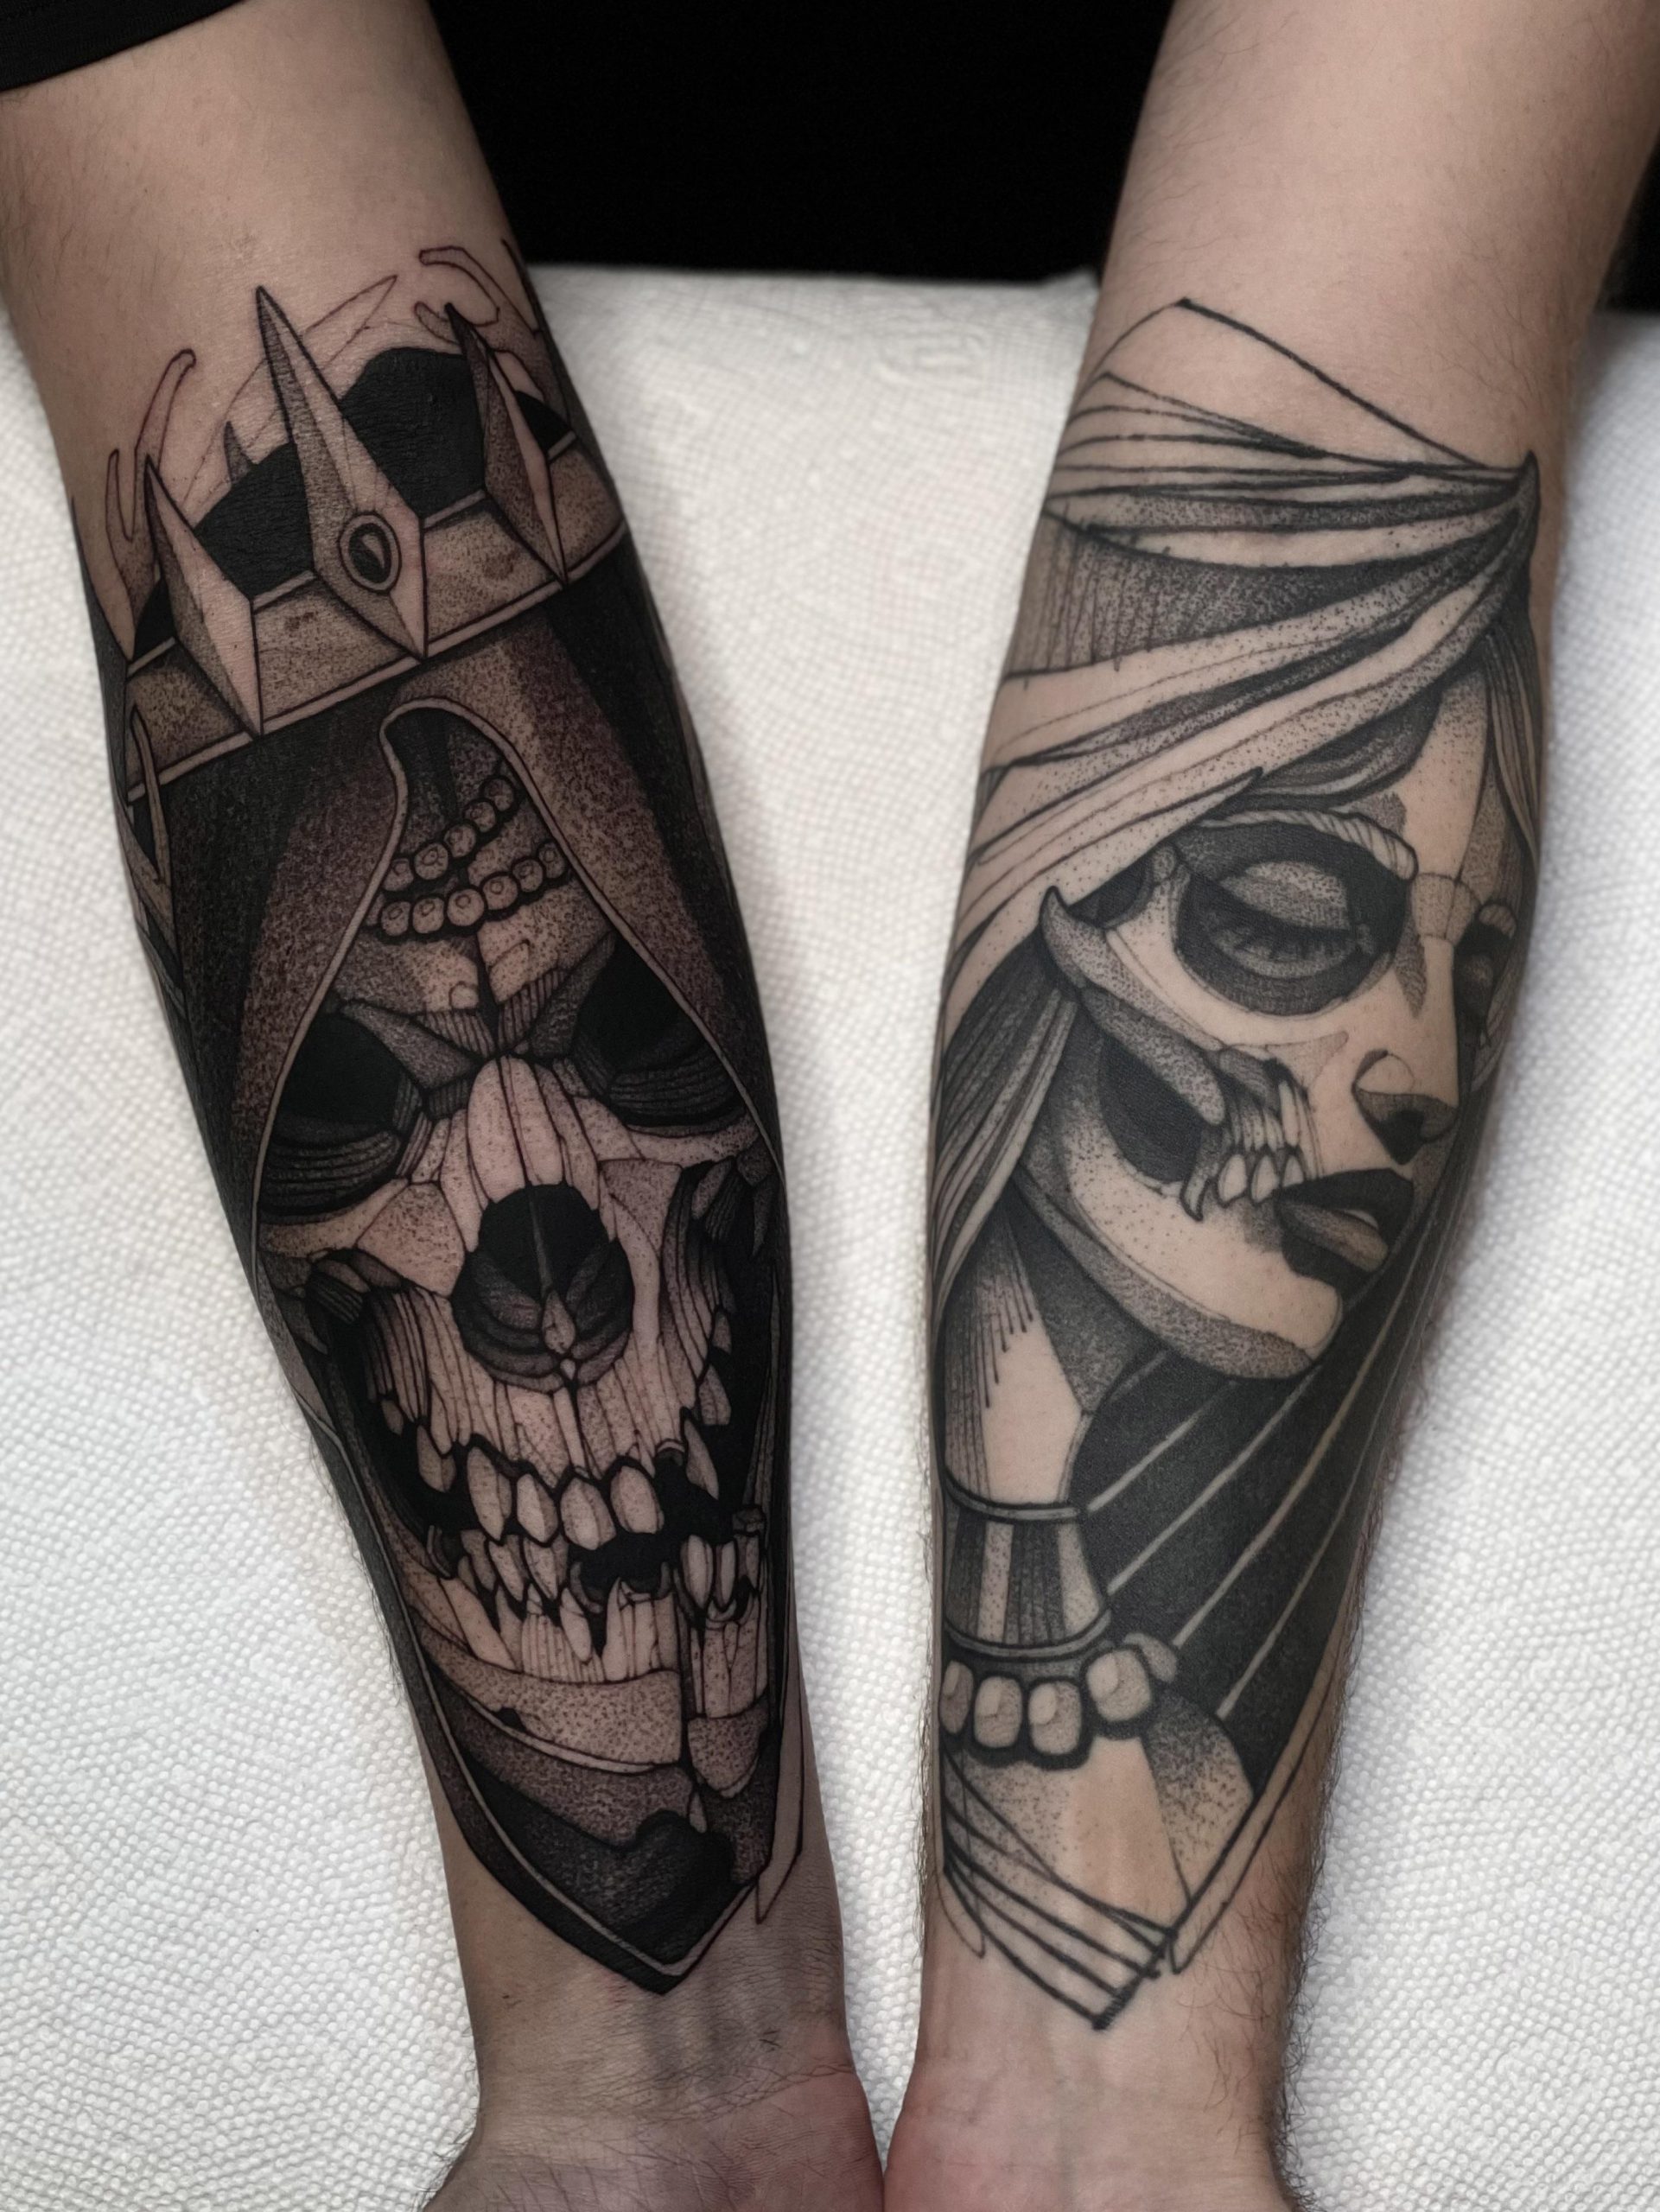 Embracing Death: The Symbolism of Grim Reaper Forearm Tattoos